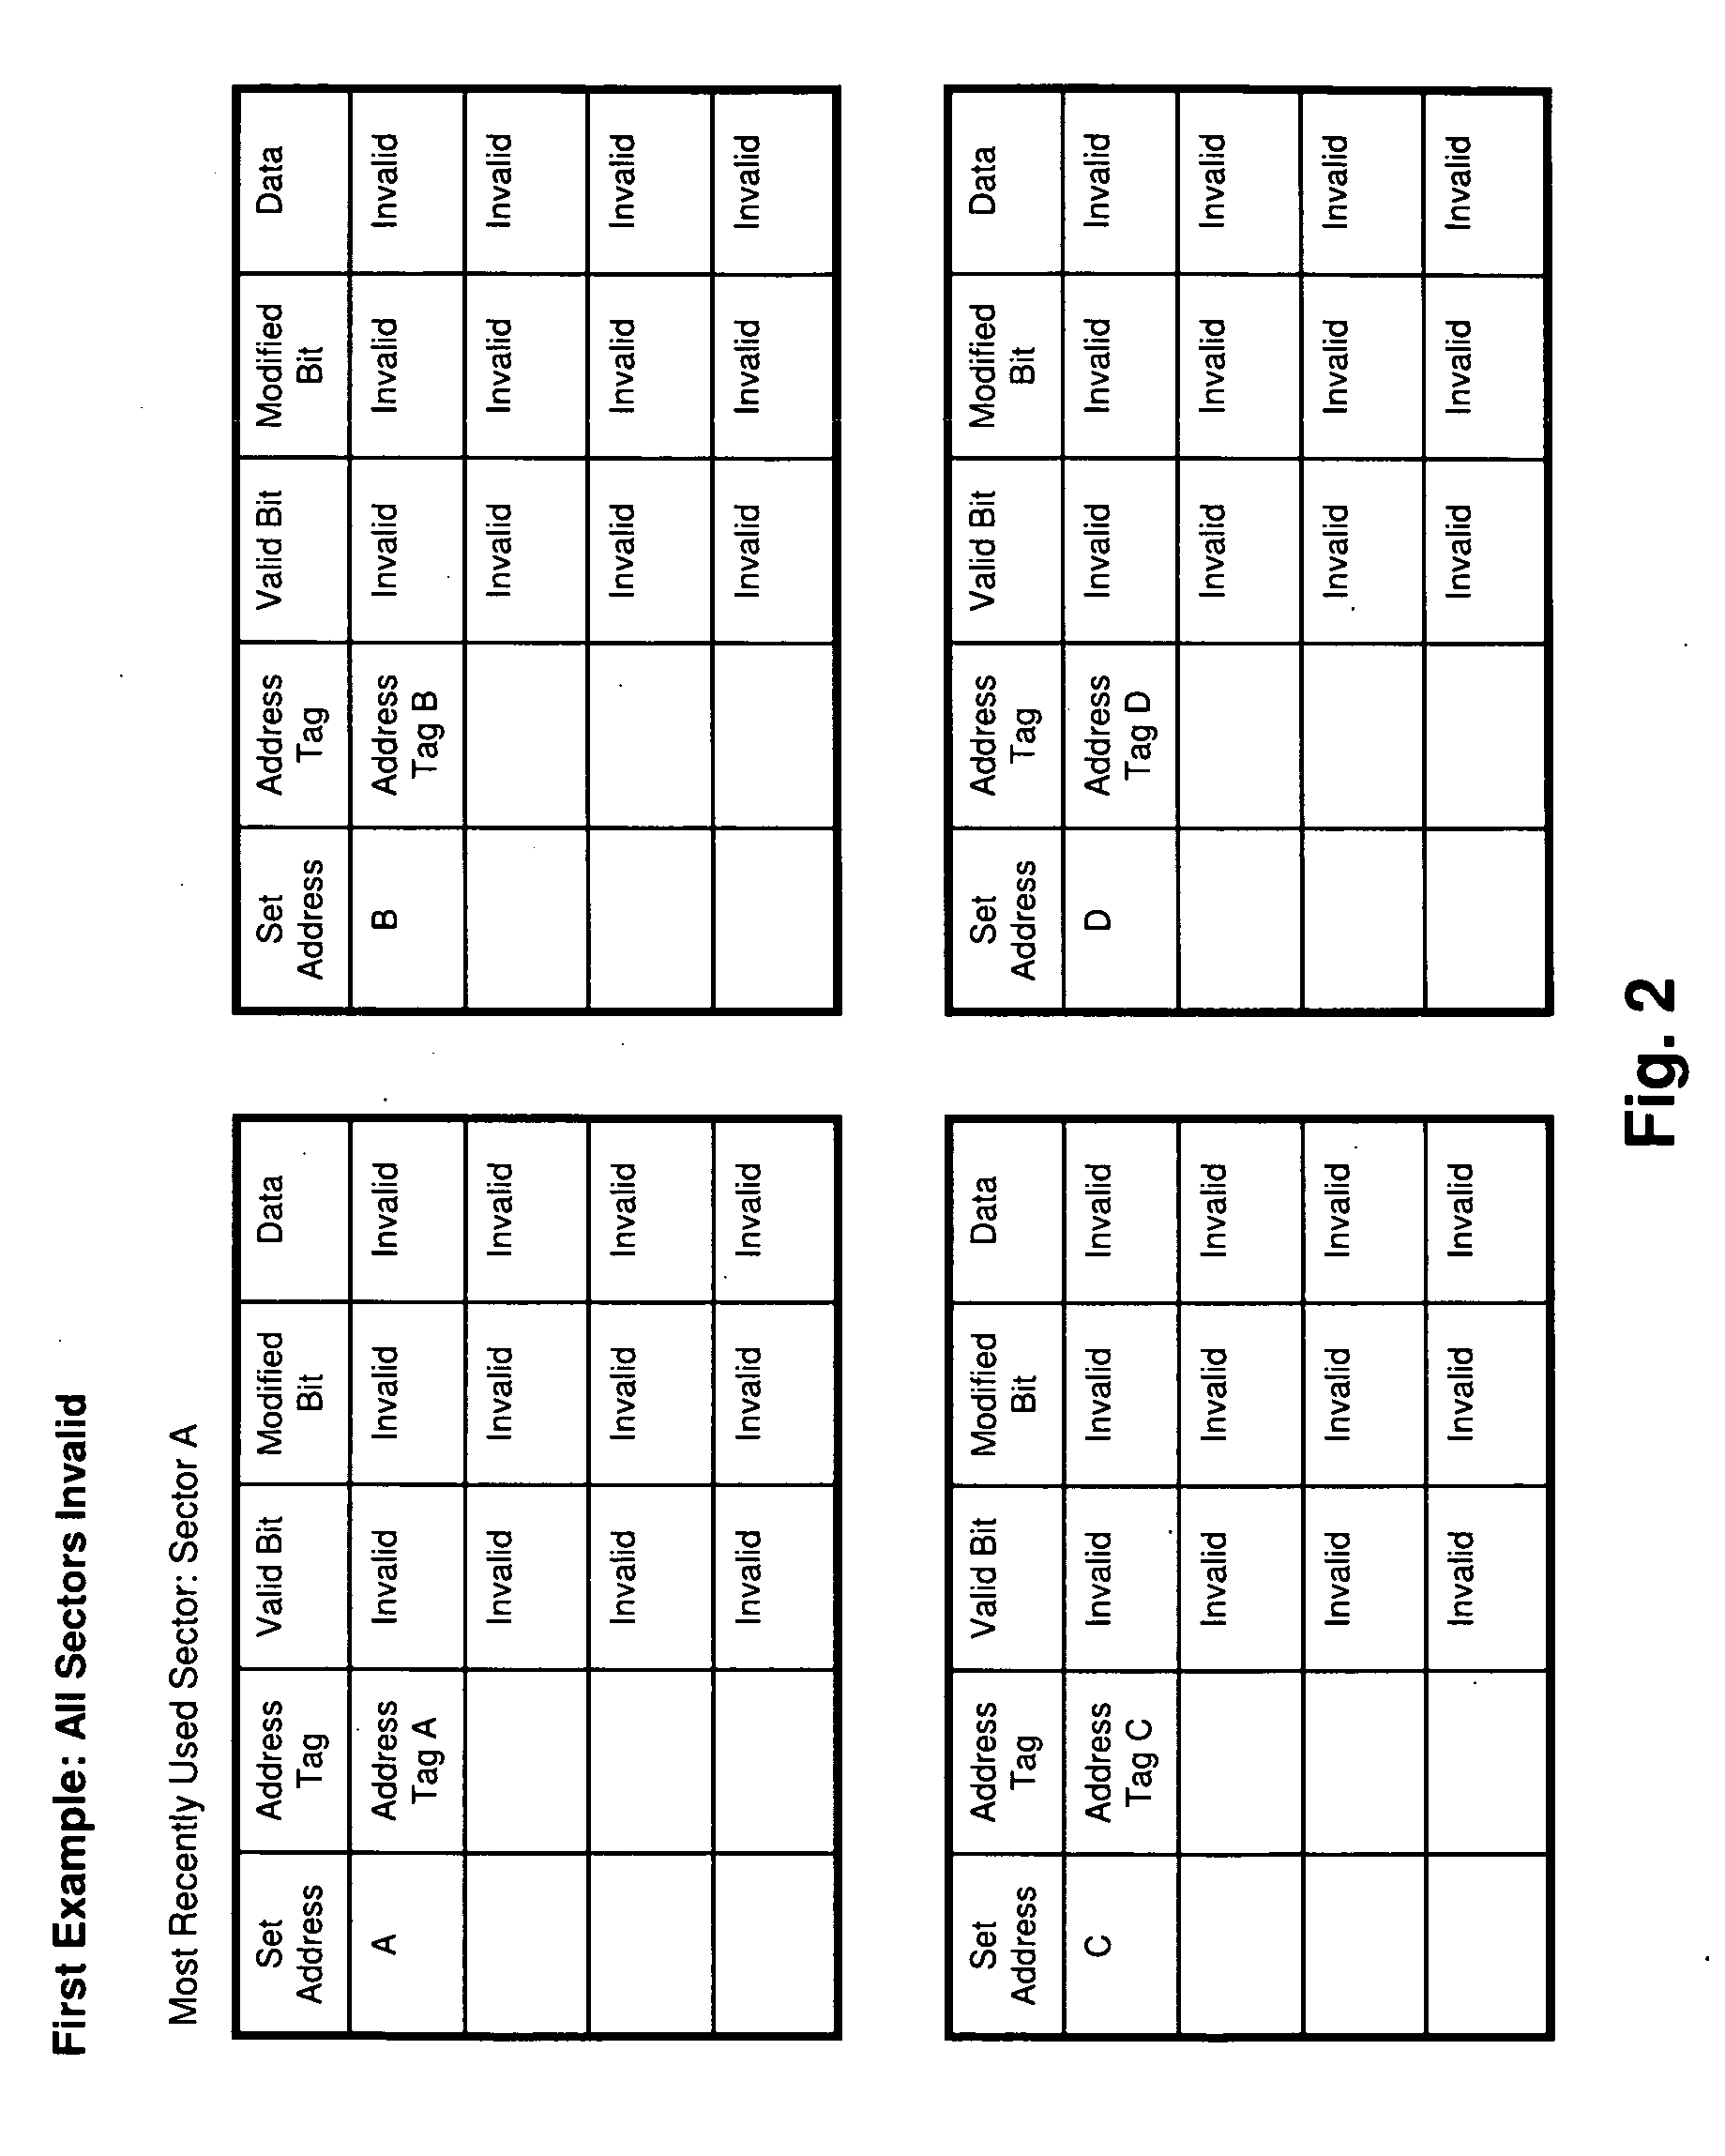 Sectored cache replacement algorithm for reducing memory writebacks